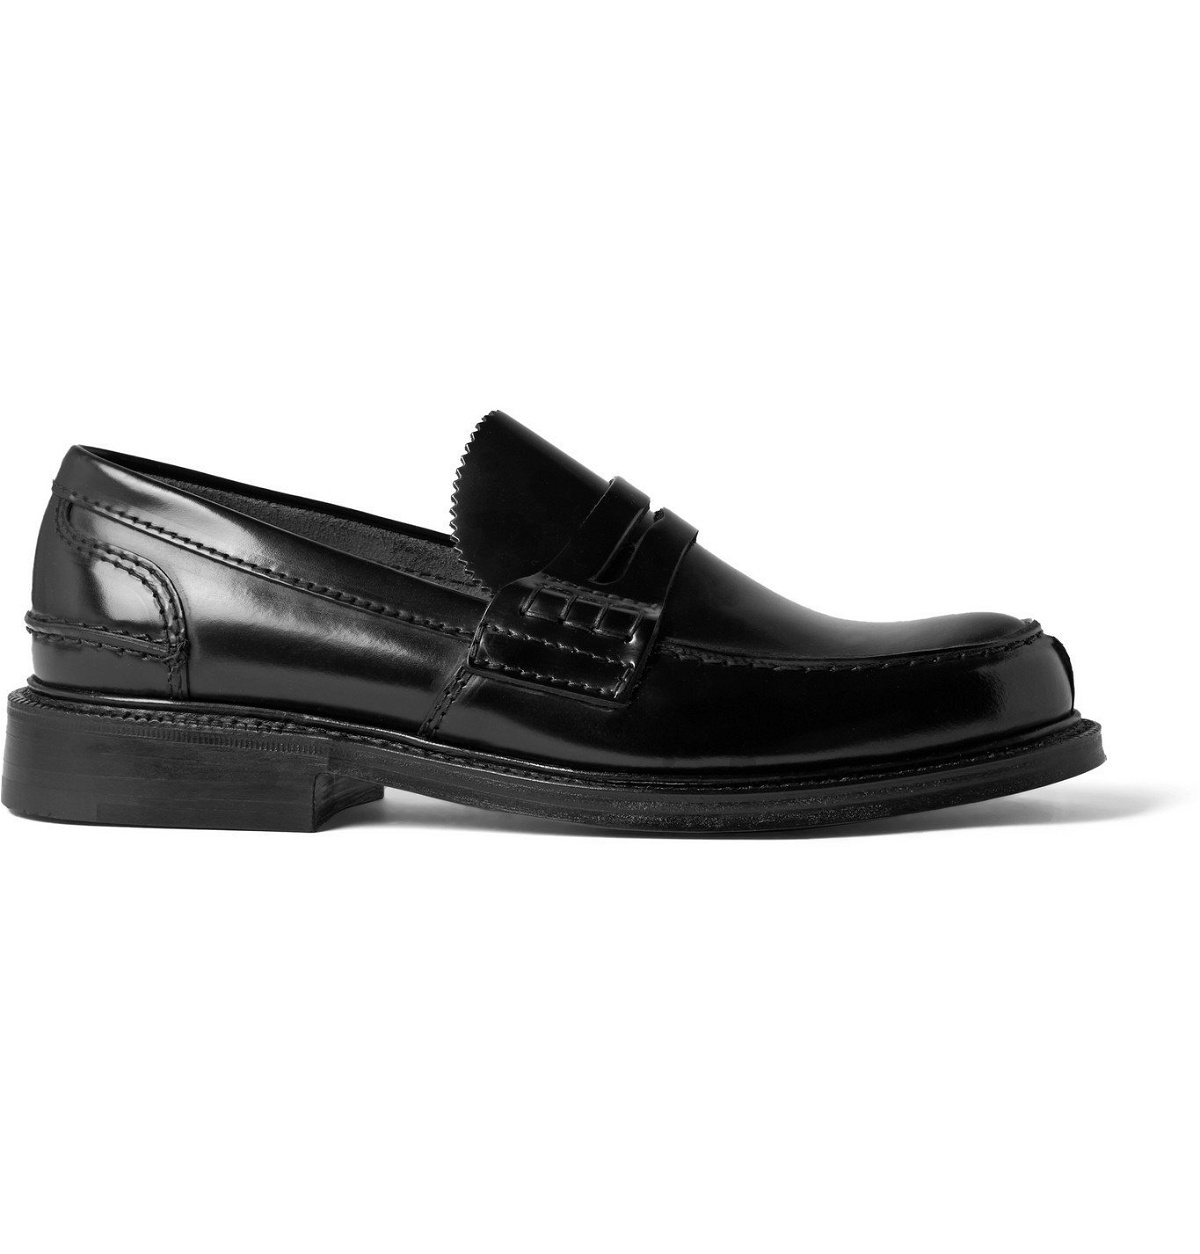 Church's - Willenhall Bookbinder Fumè Leather Penny Loafers - Black ...